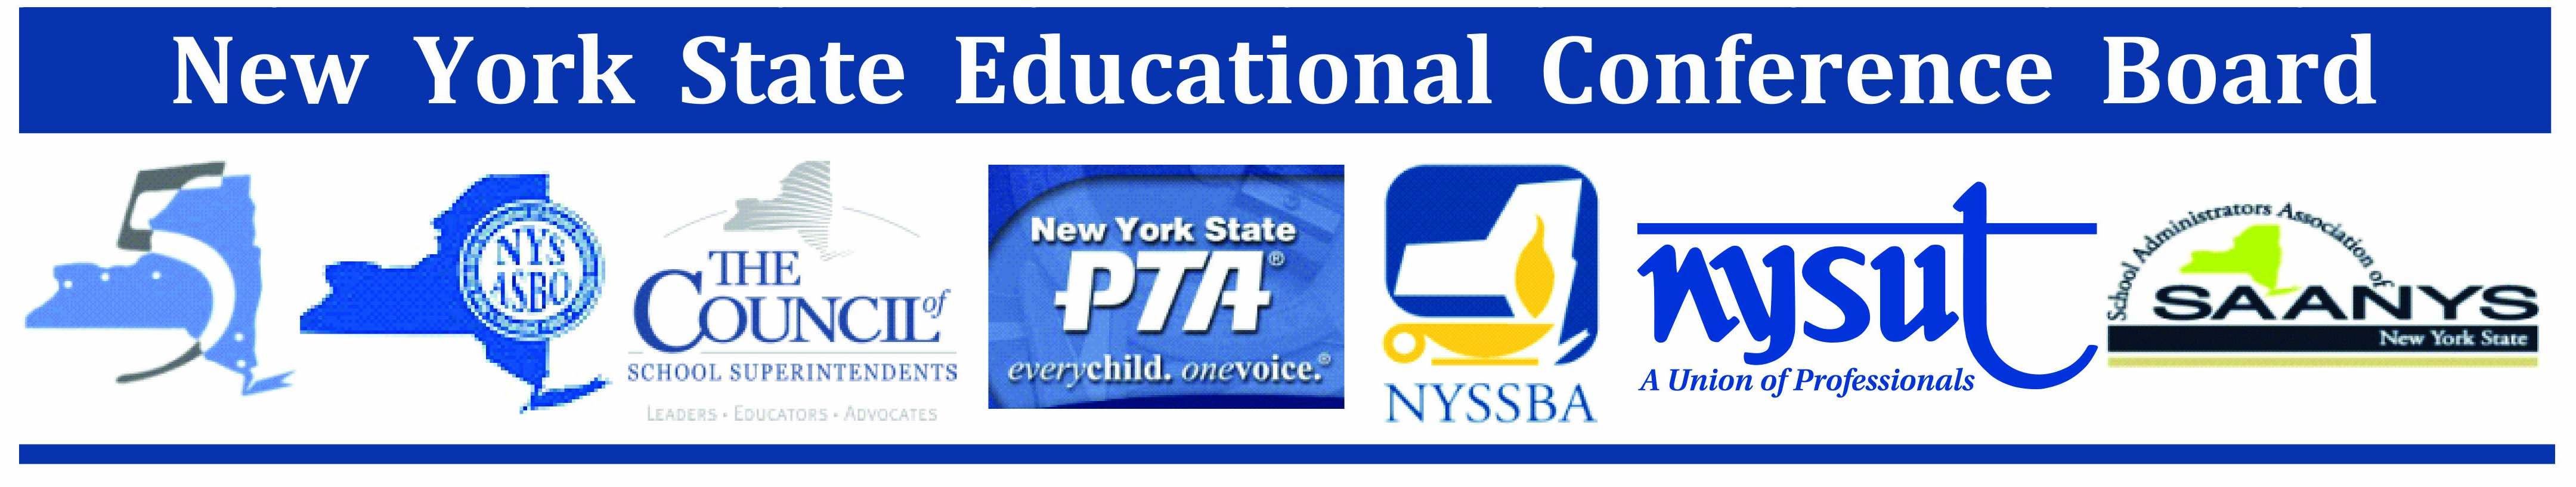 New York State Educational Conference Board